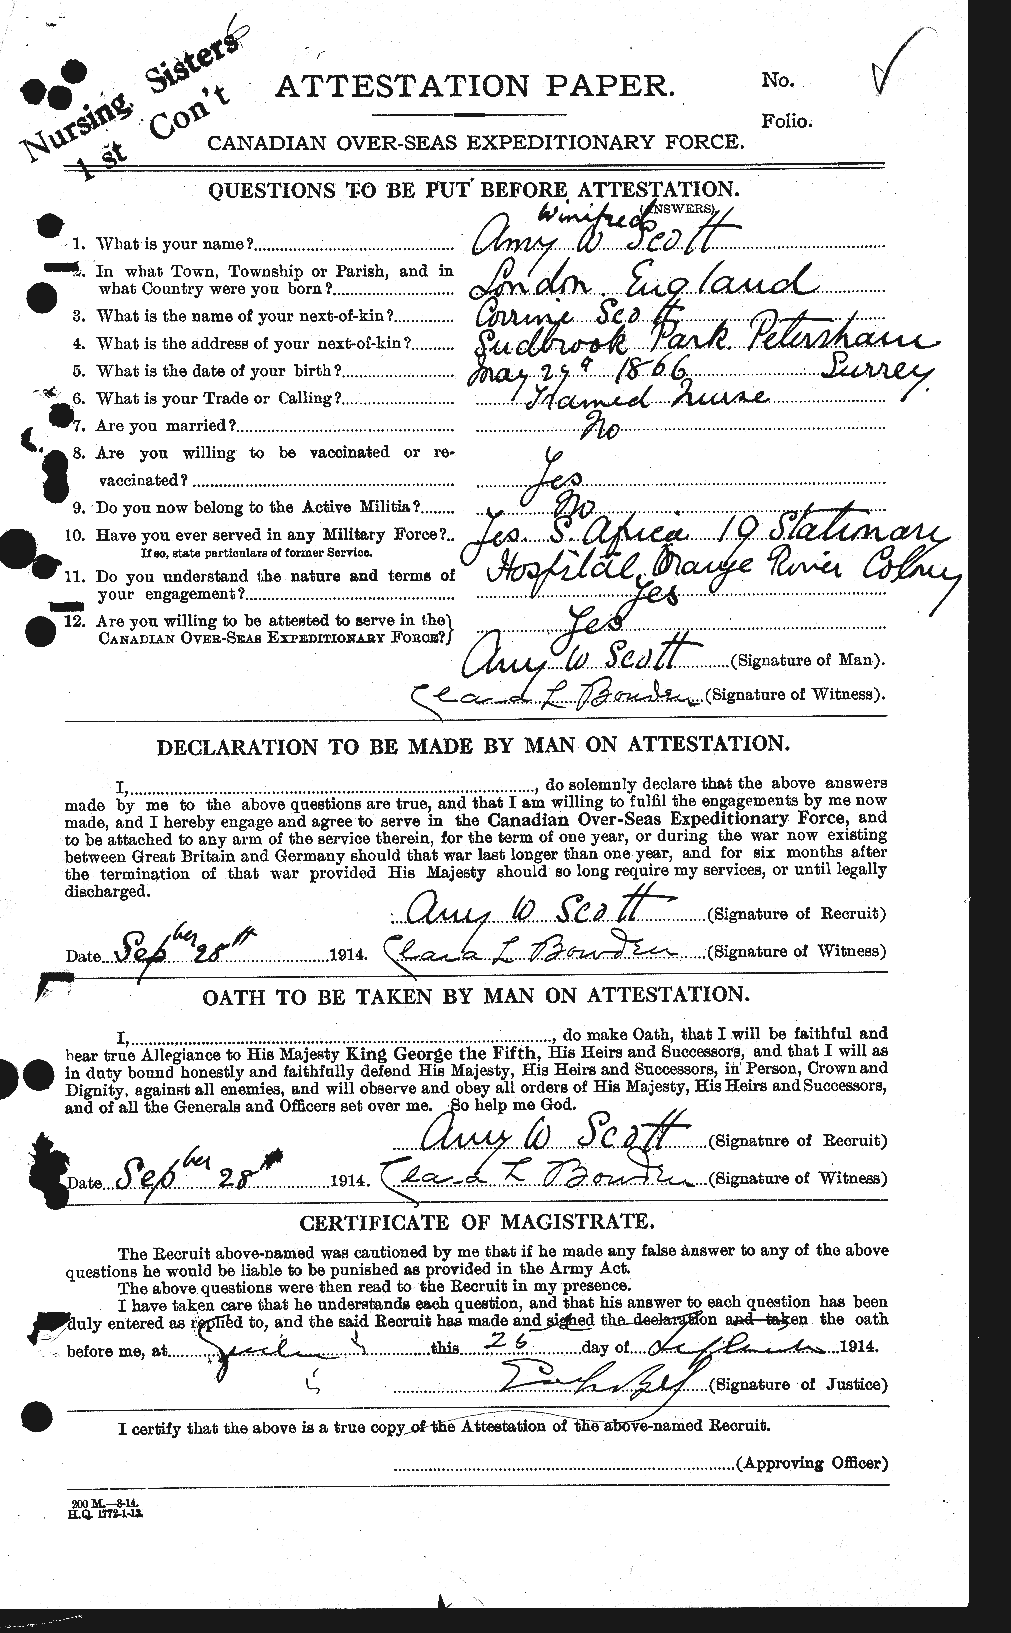 Personnel Records of the First World War - CEF 086563a